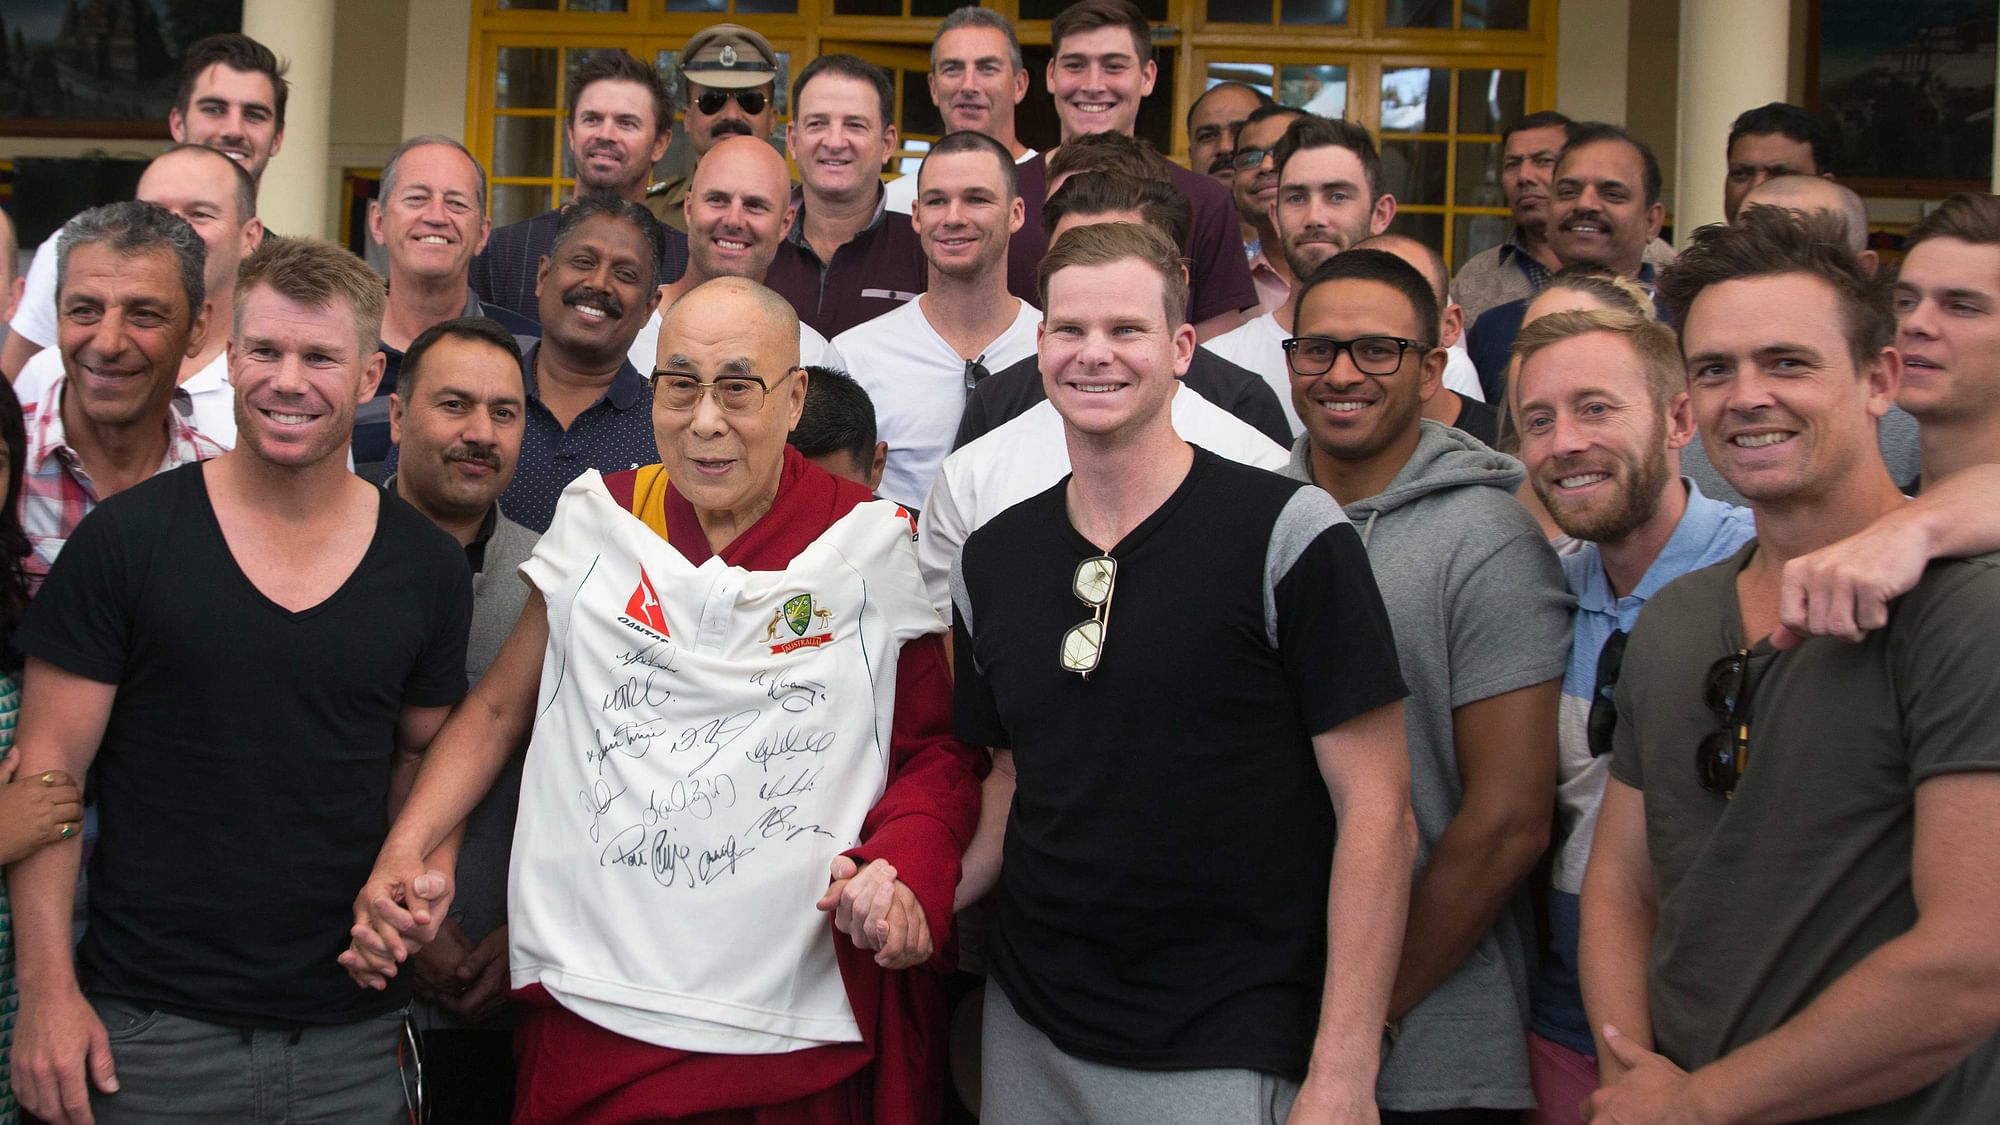 Tibetan spiritual leader the Dalai Lama with the Australian cricket team during an interaction with the team at the Tsuglakhang temple in Dharmsala. (Photo: AP)